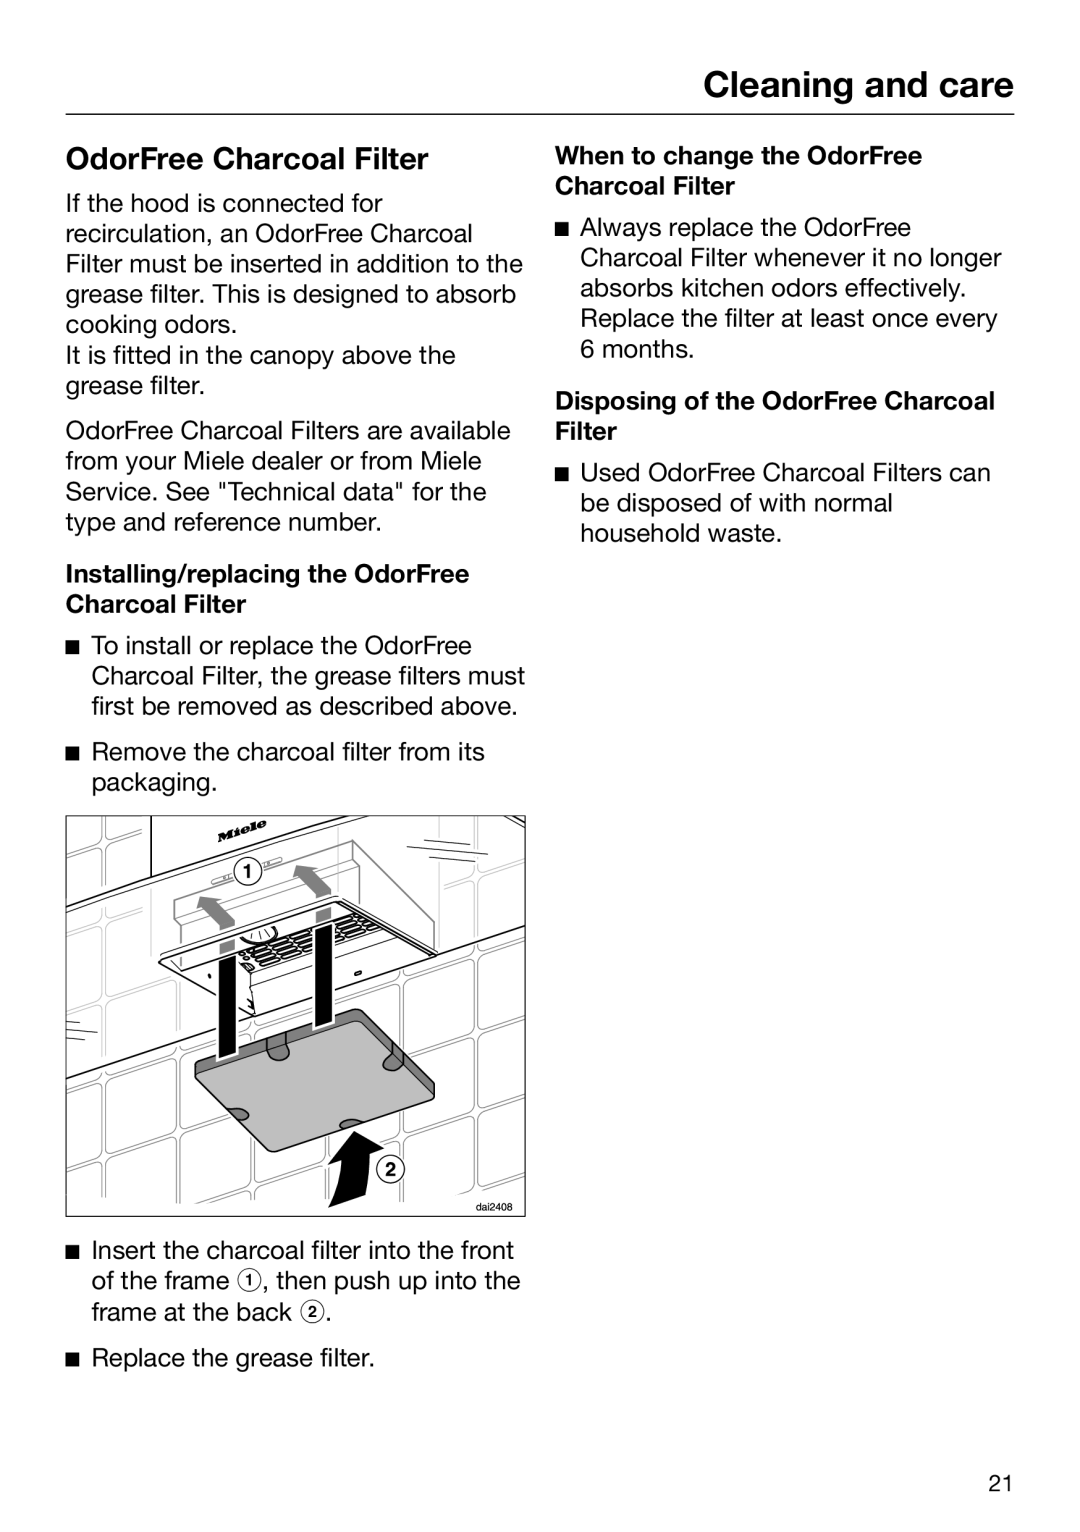 Miele 09 968 280 installation instructions Cleaning and care, Installing/replacing the OdorFree Charcoal Filter 